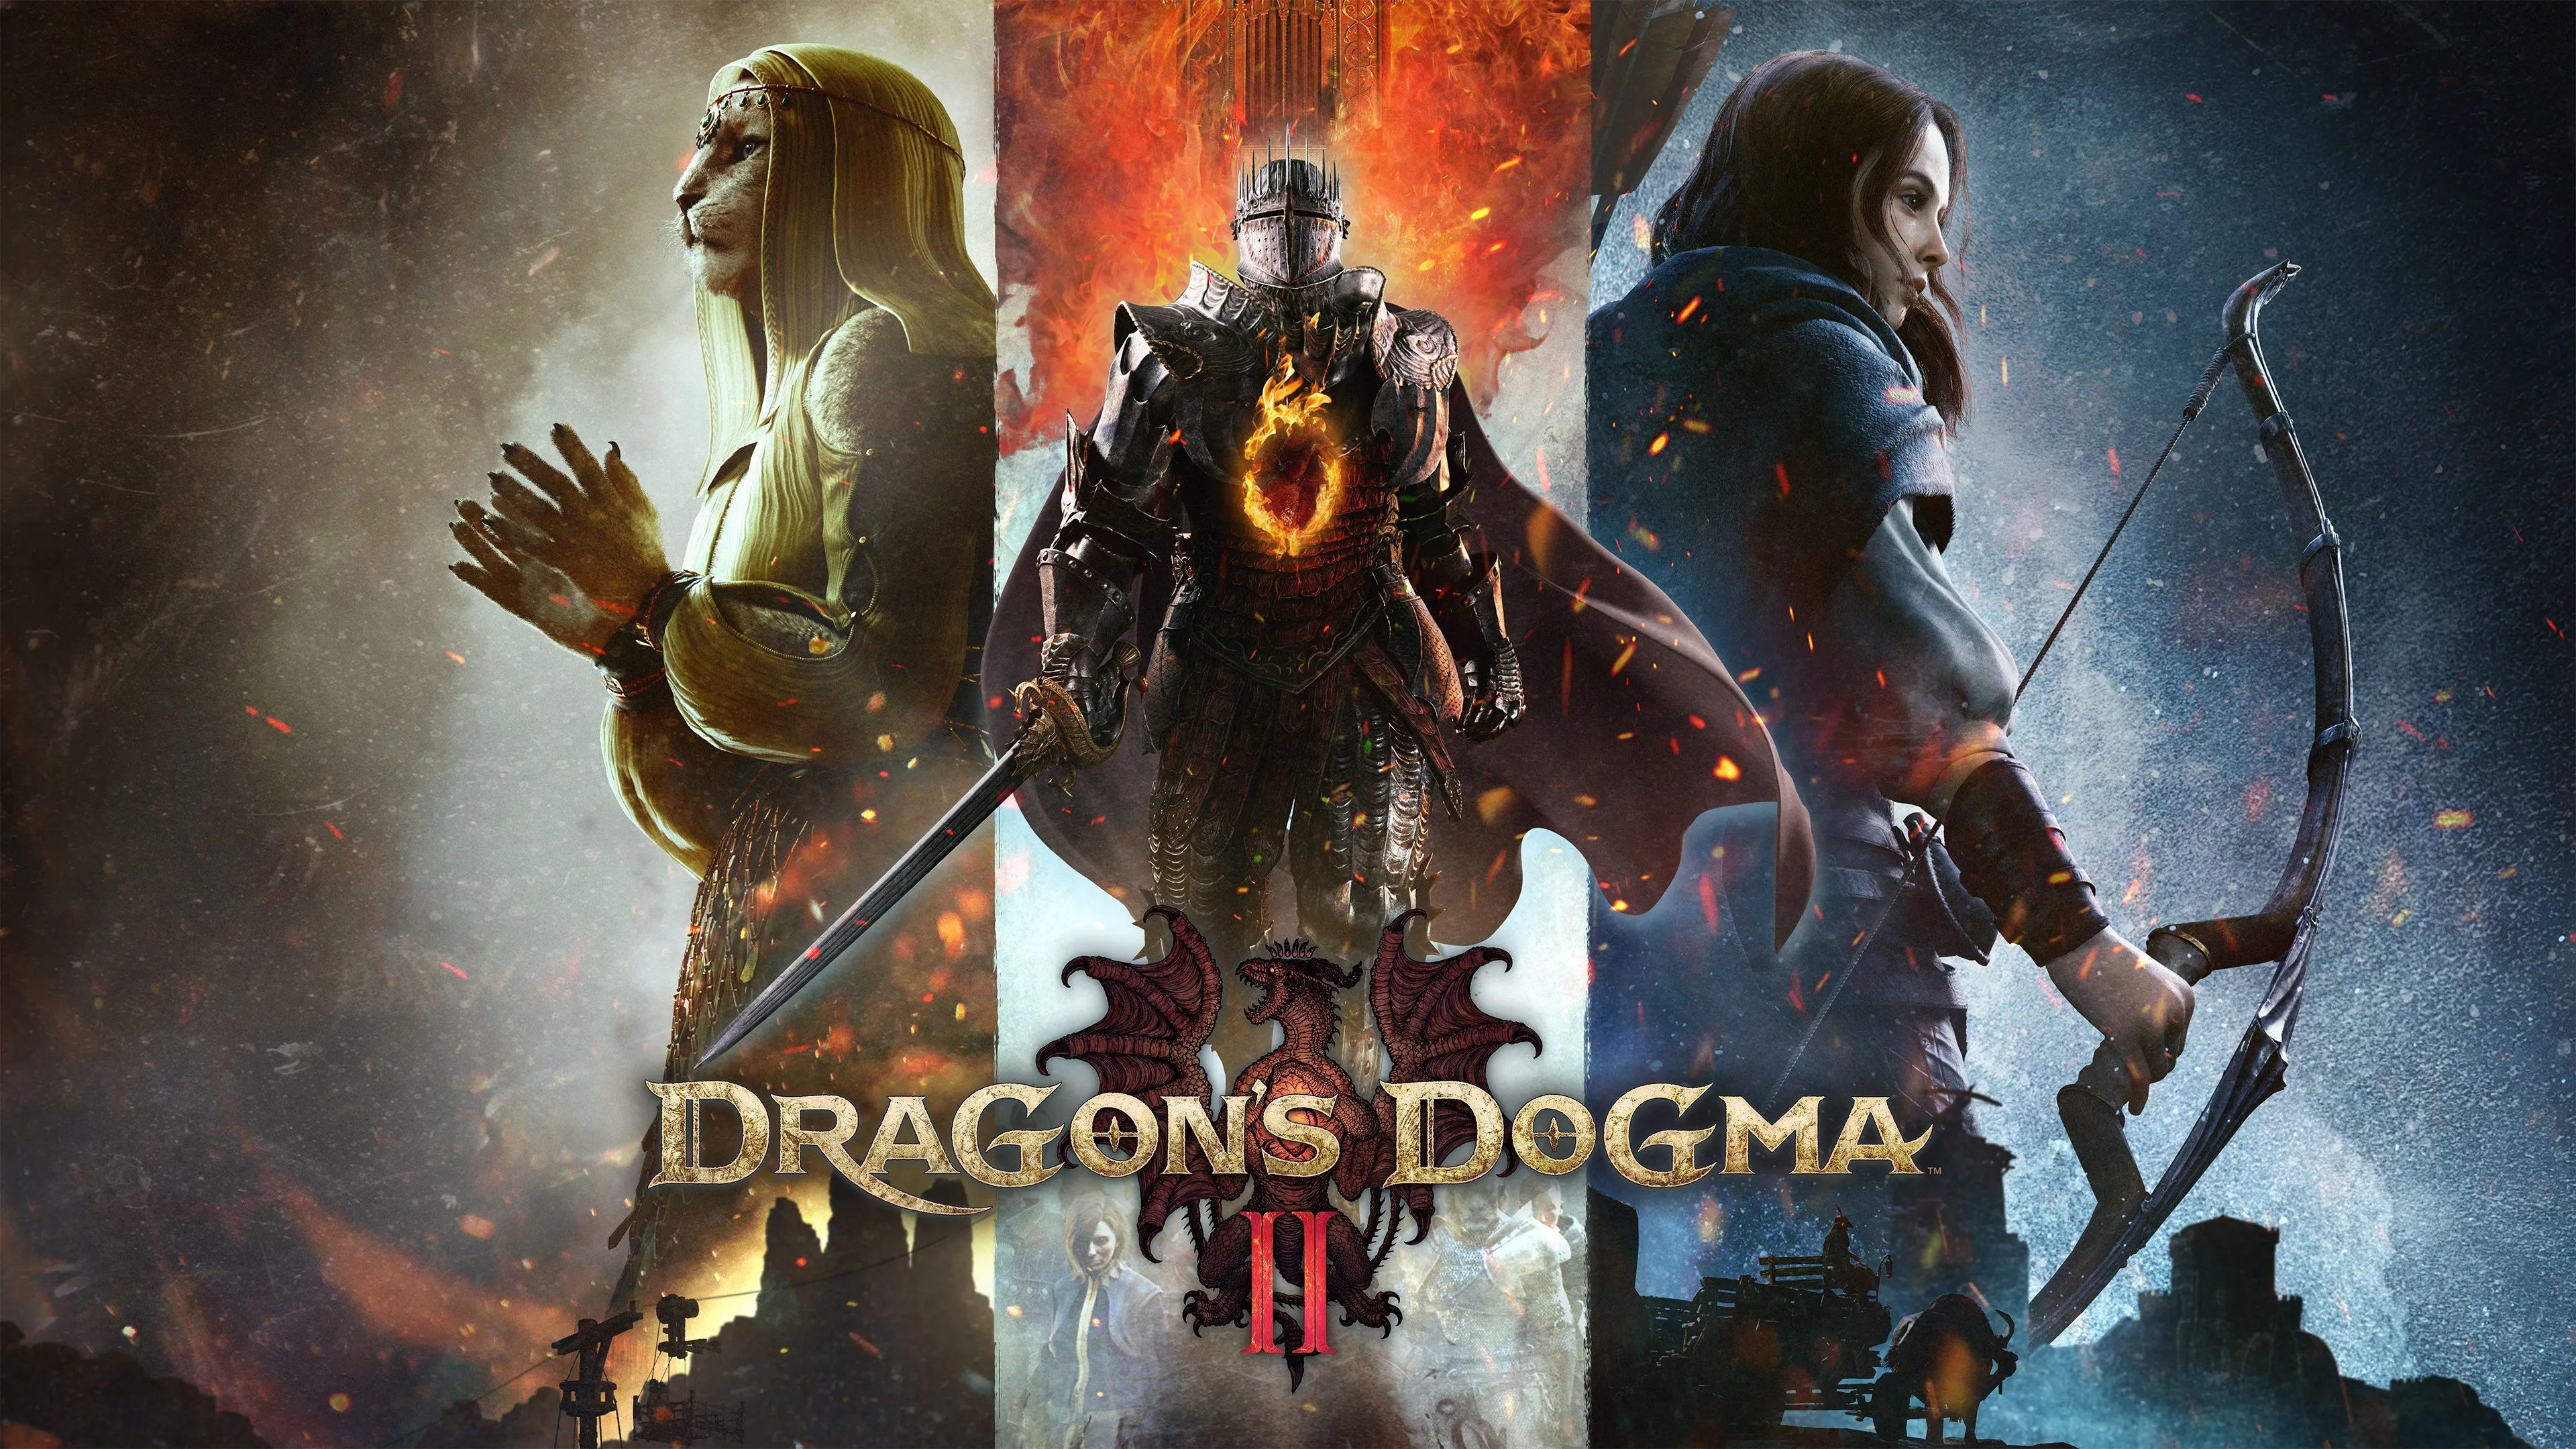 New Dragon's Dogma 2 trailer with 18 minutes of gameplay released